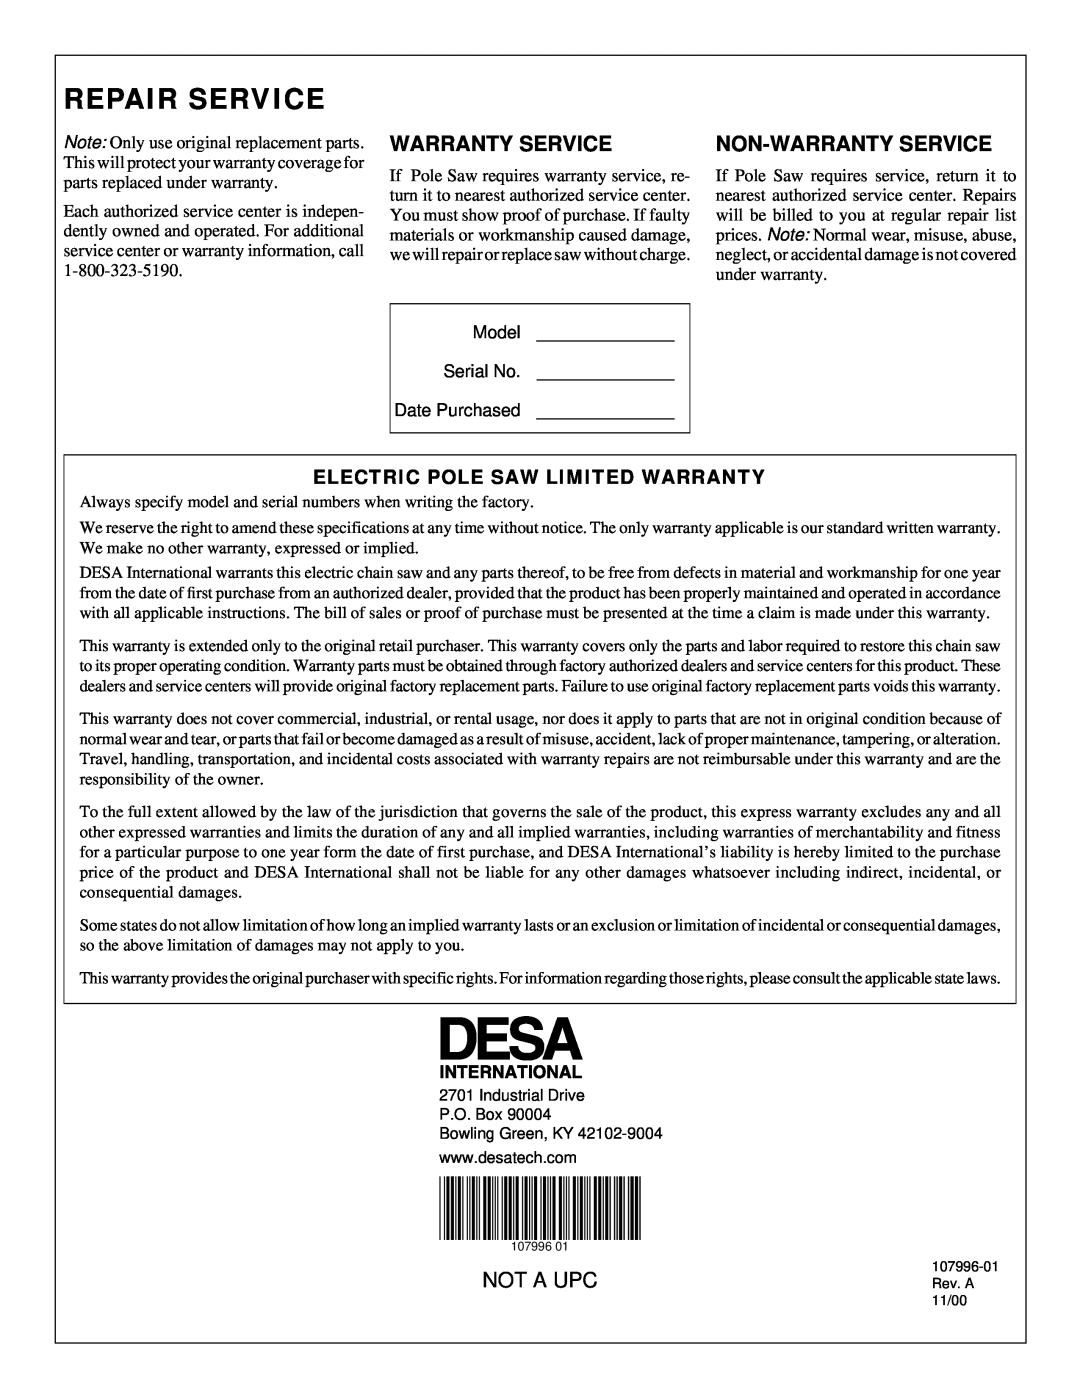 Desa RPS 96 owner manual Repair Service, Non-Warranty Service, Electric Pole Saw Limited Warranty, Not A Upc 